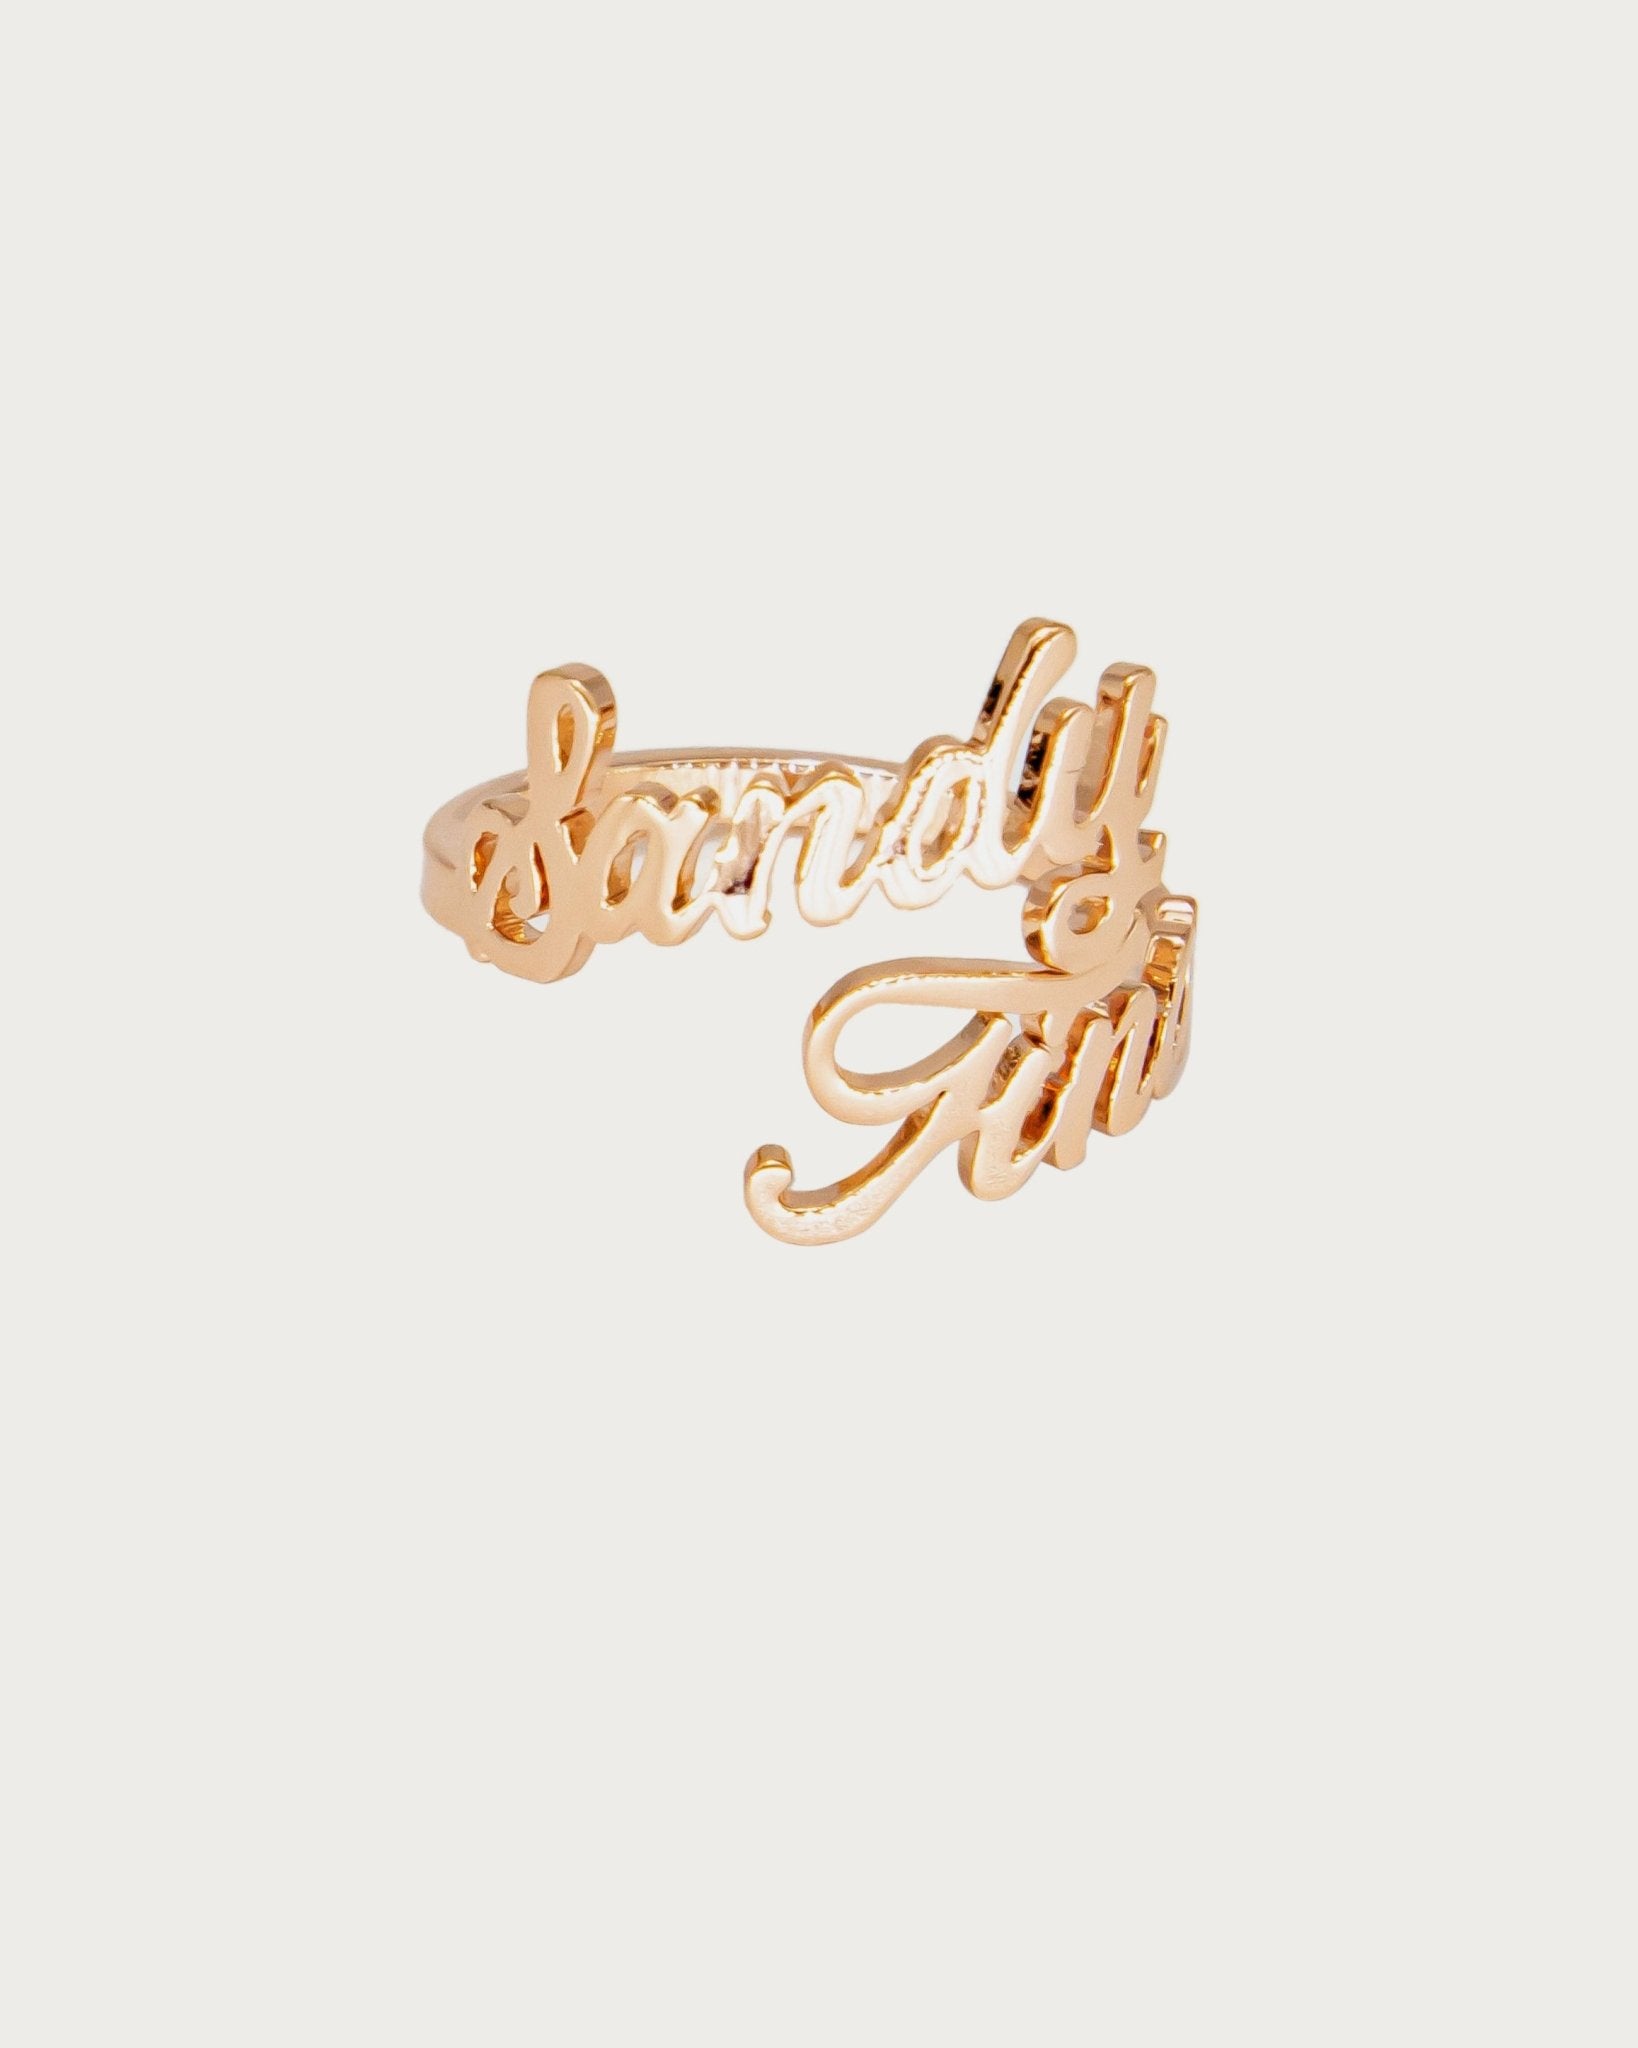 The Customized Double Name Ring